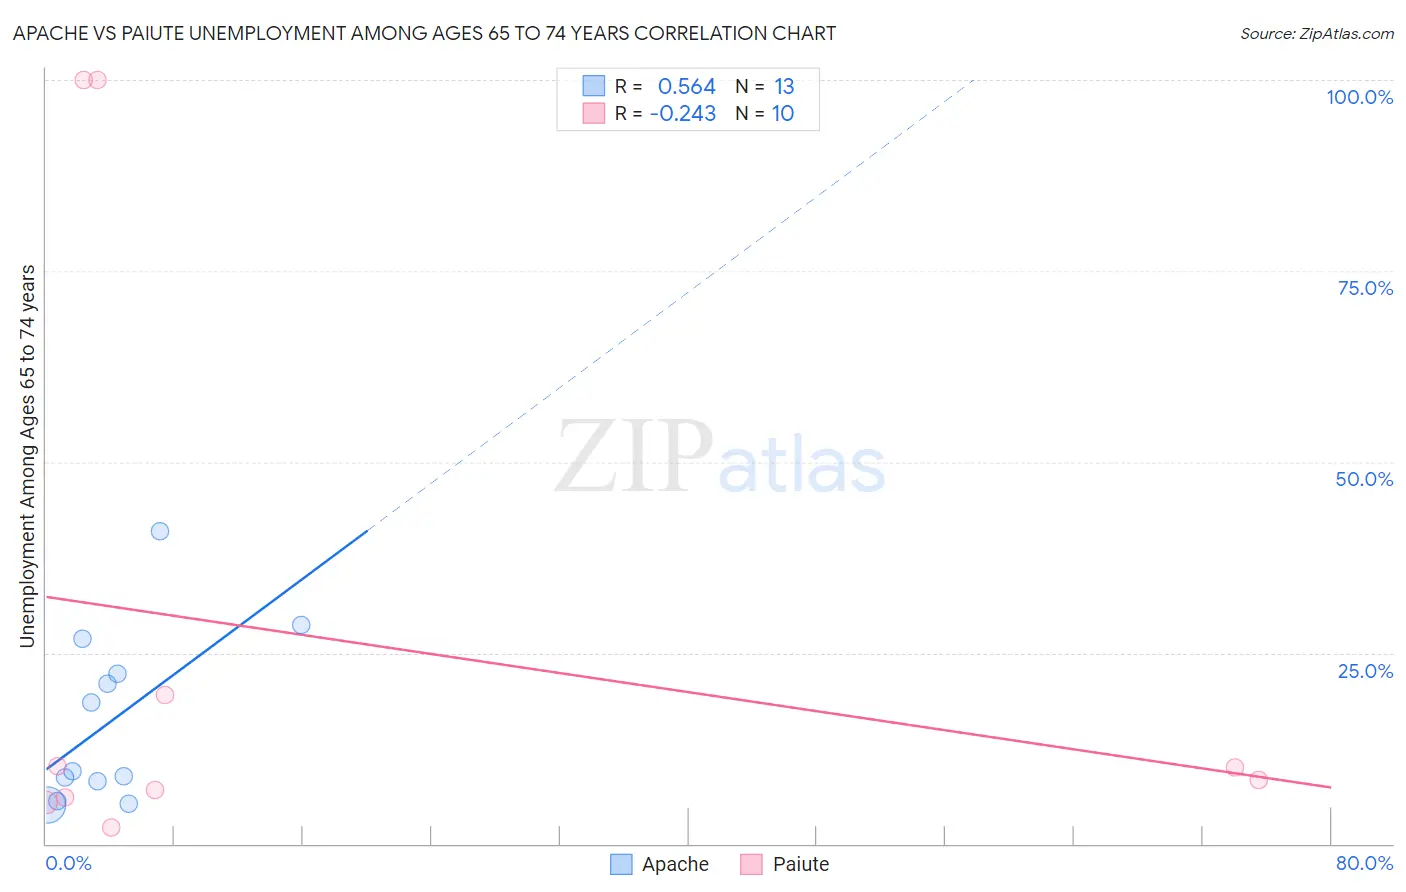 Apache vs Paiute Unemployment Among Ages 65 to 74 years